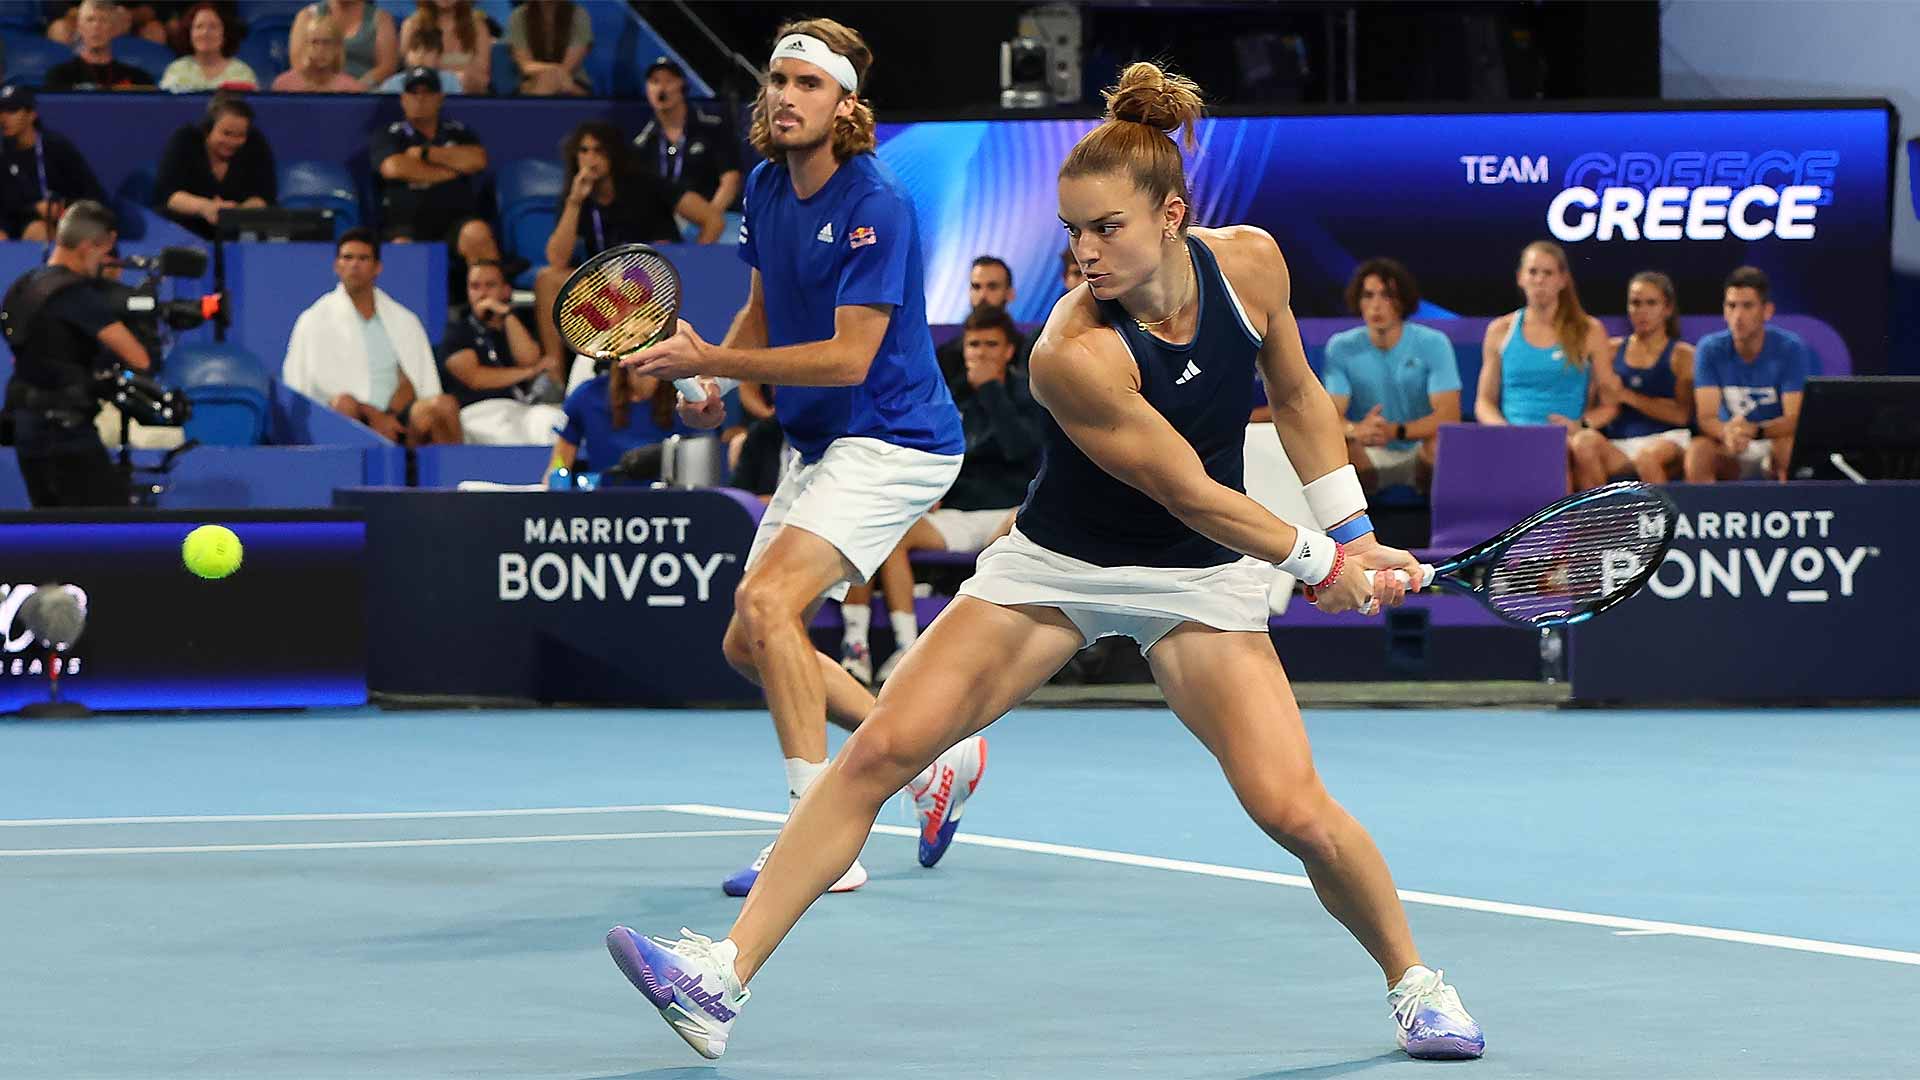 Stefanos Tsitsipas and Maria Sakkari in mixed doubles action on Wednesday during the United Cup City Finals in Perth.